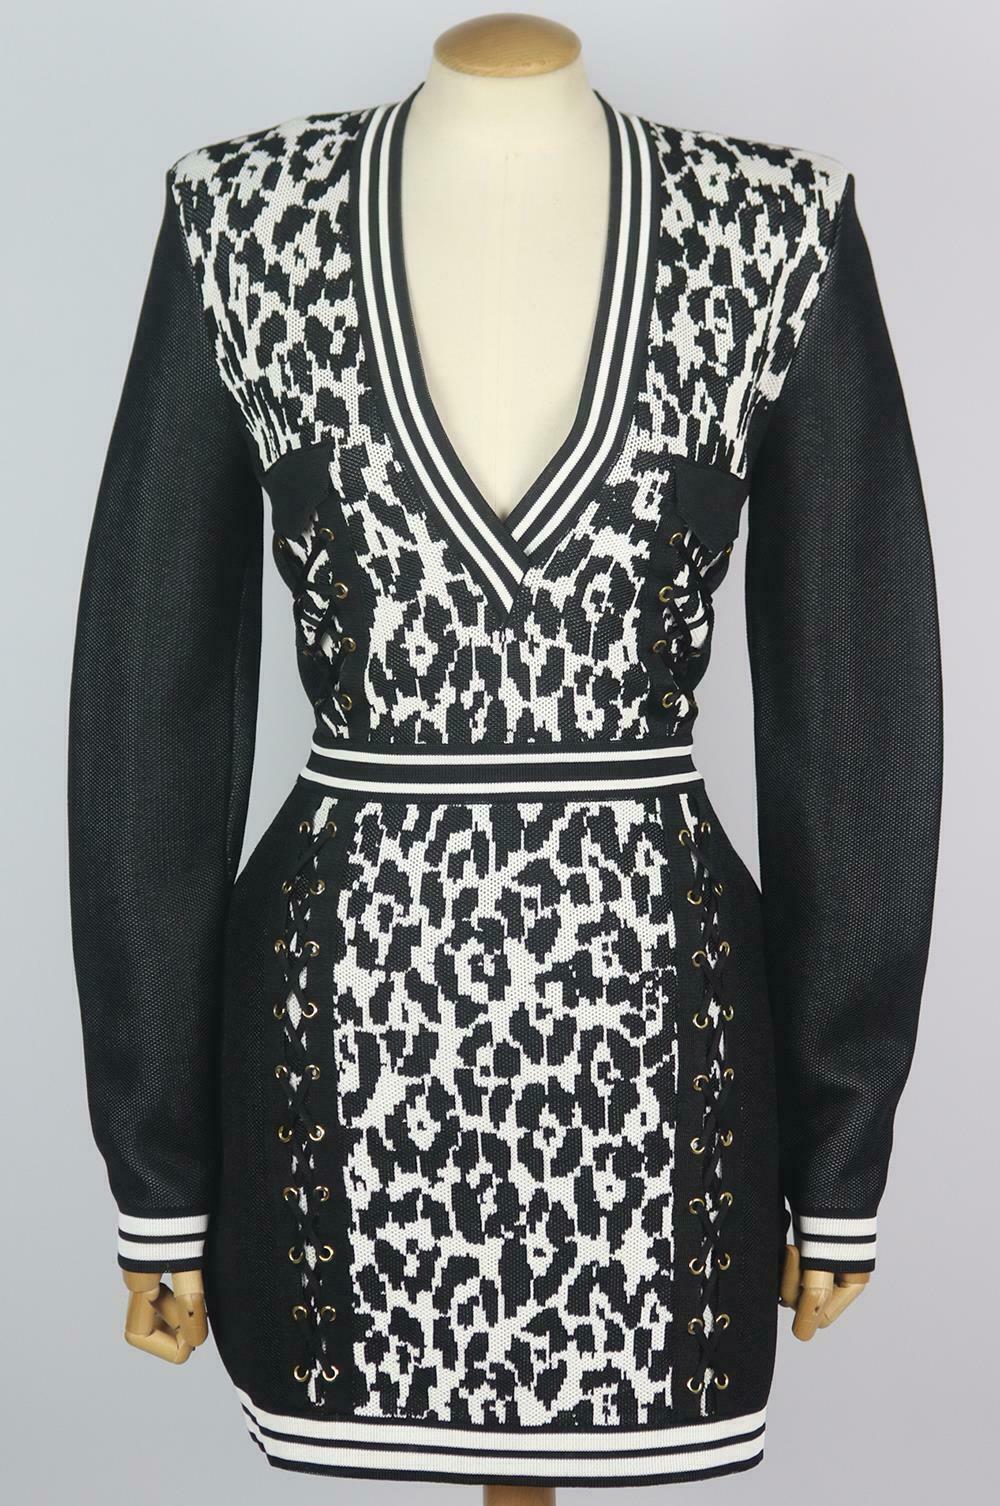 This Balmain dress has been crafted from stretch-knit and is designed with lace-up down the front on each side, it has strong shoulder pads and fits for a slim silhouette and is finished off with a leopard jacquard-knit.
Black and white